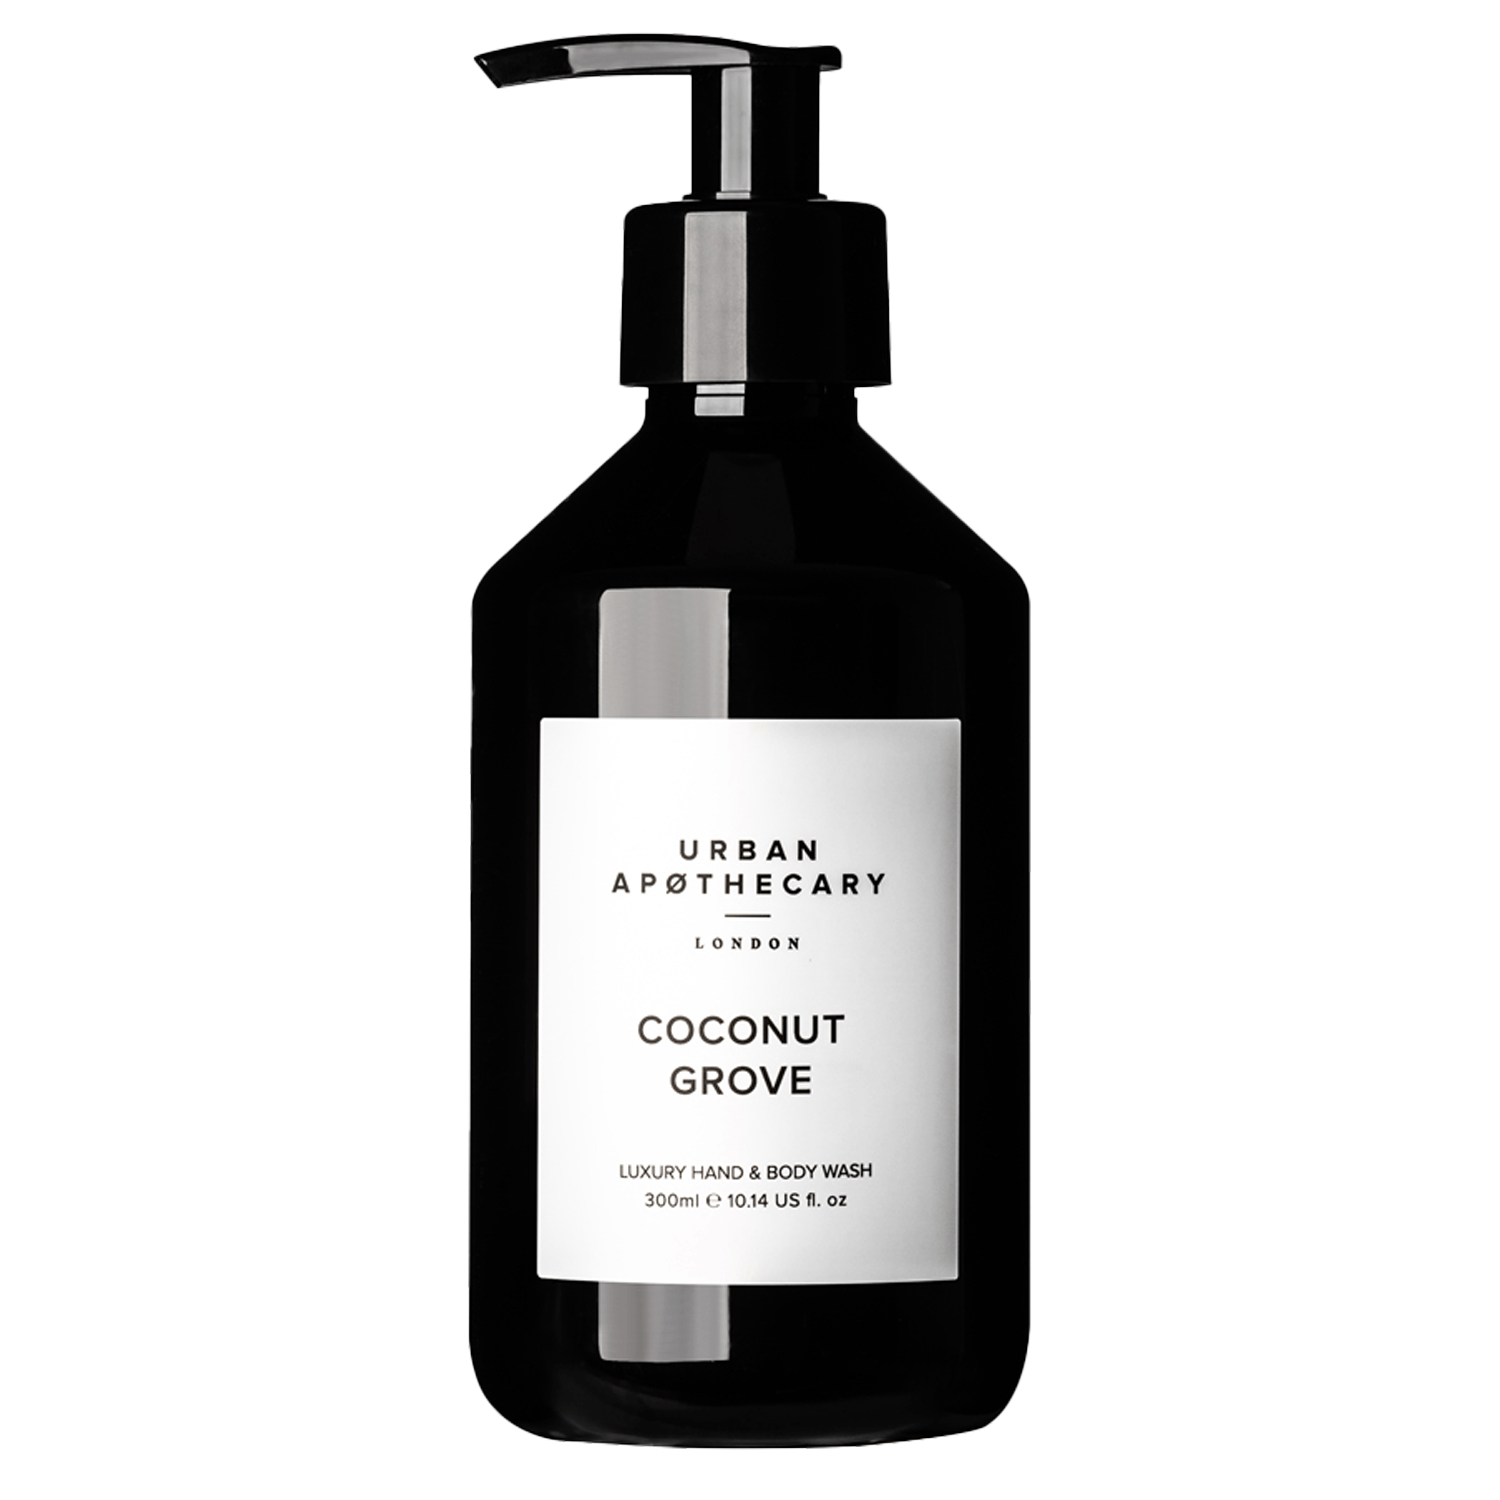 Product image from Urban Apothecary - Luxury Hand & Body Wash Coconut Grove